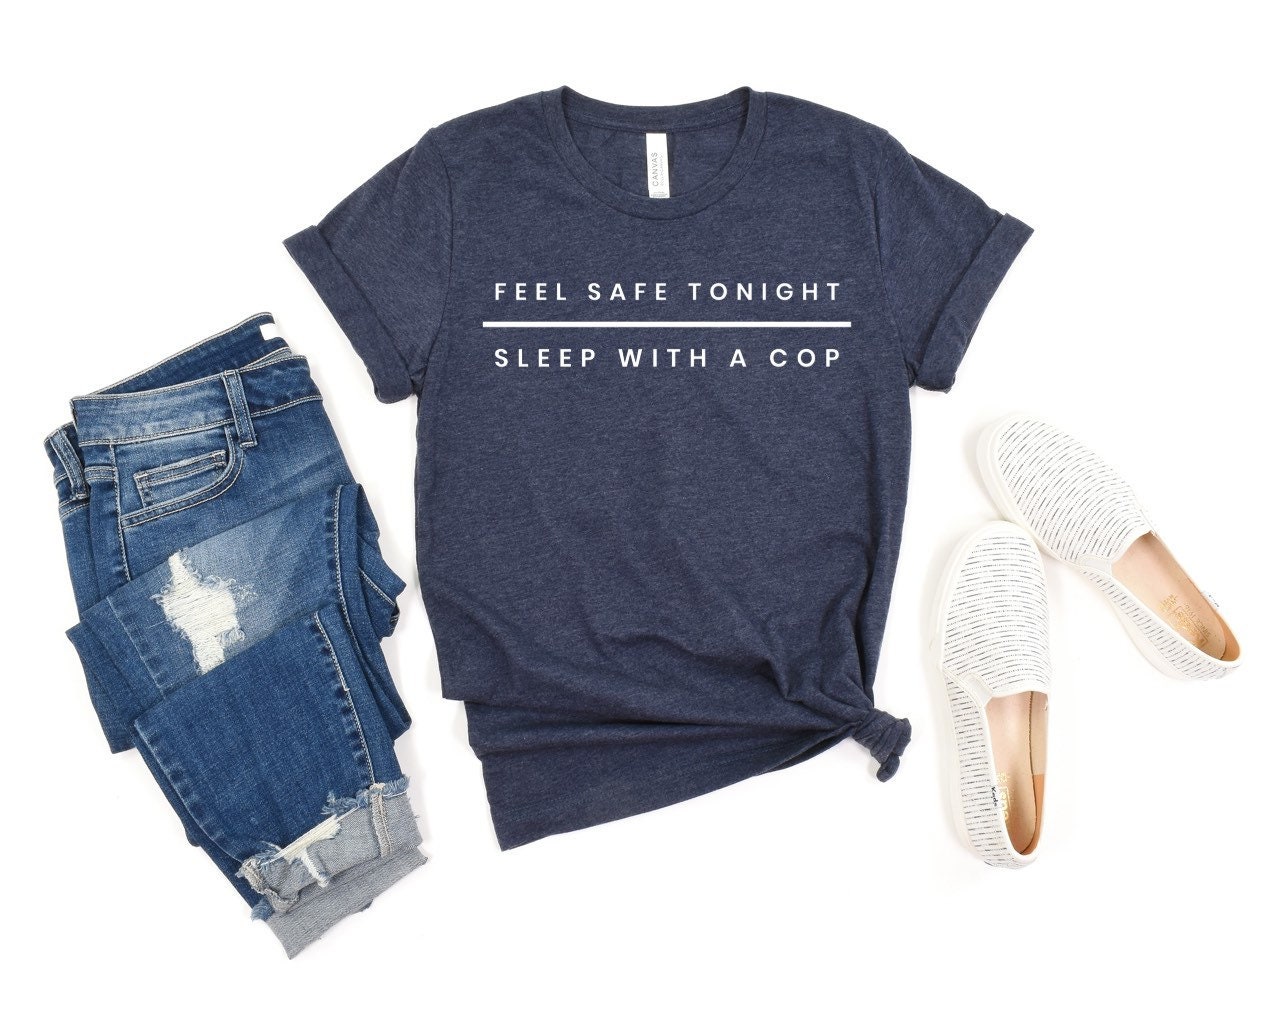 Police Officer Gifts, Eat Sleep Arrest Repeat, Law Enforcement